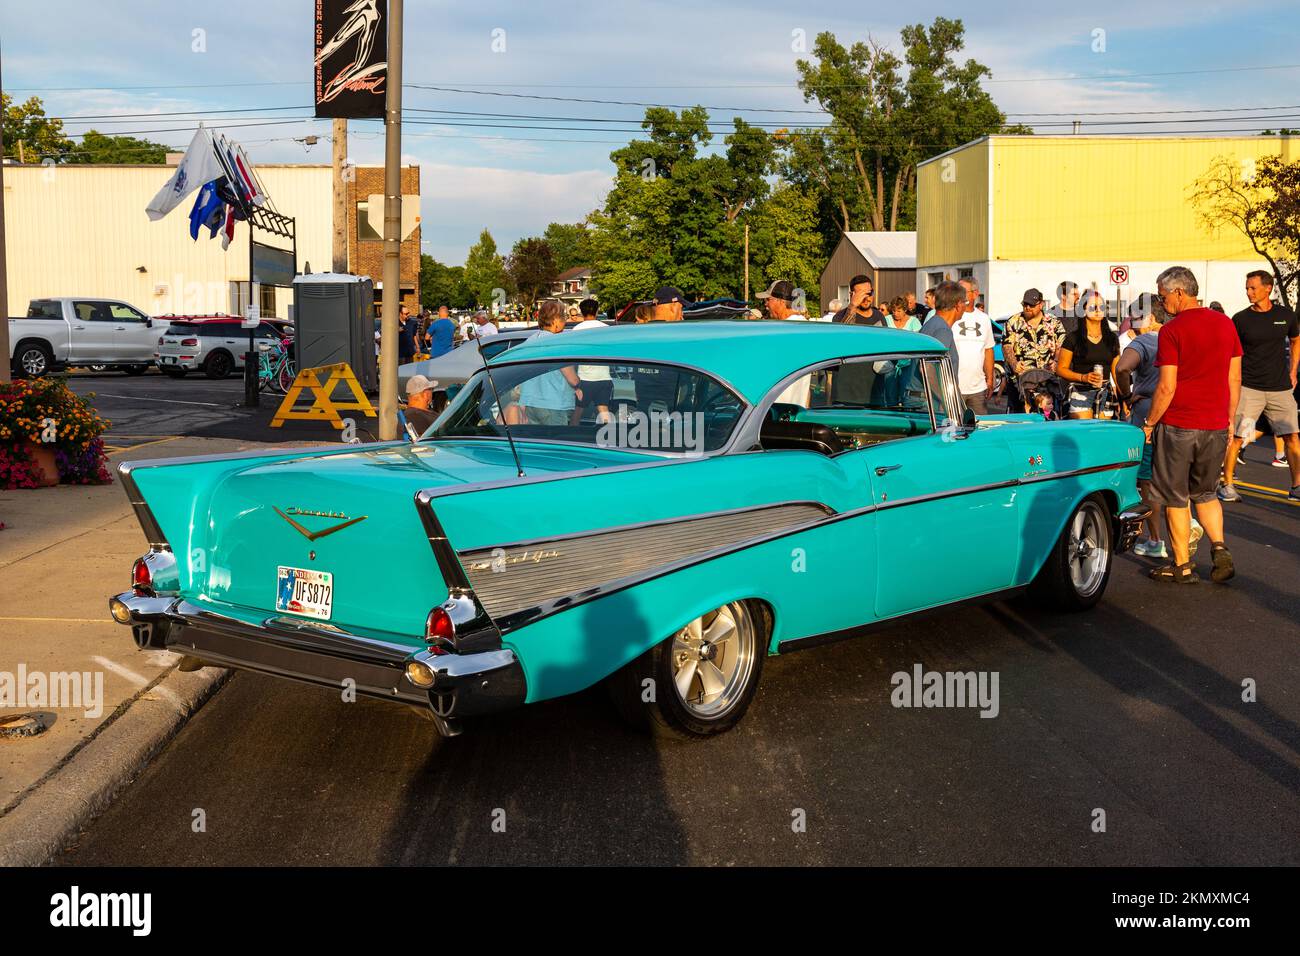 An iconic blue 1957 Chevrolet Bel-Air coupe is parked at a car show in downtown Auburn, Indiana, USA. Stock Photo